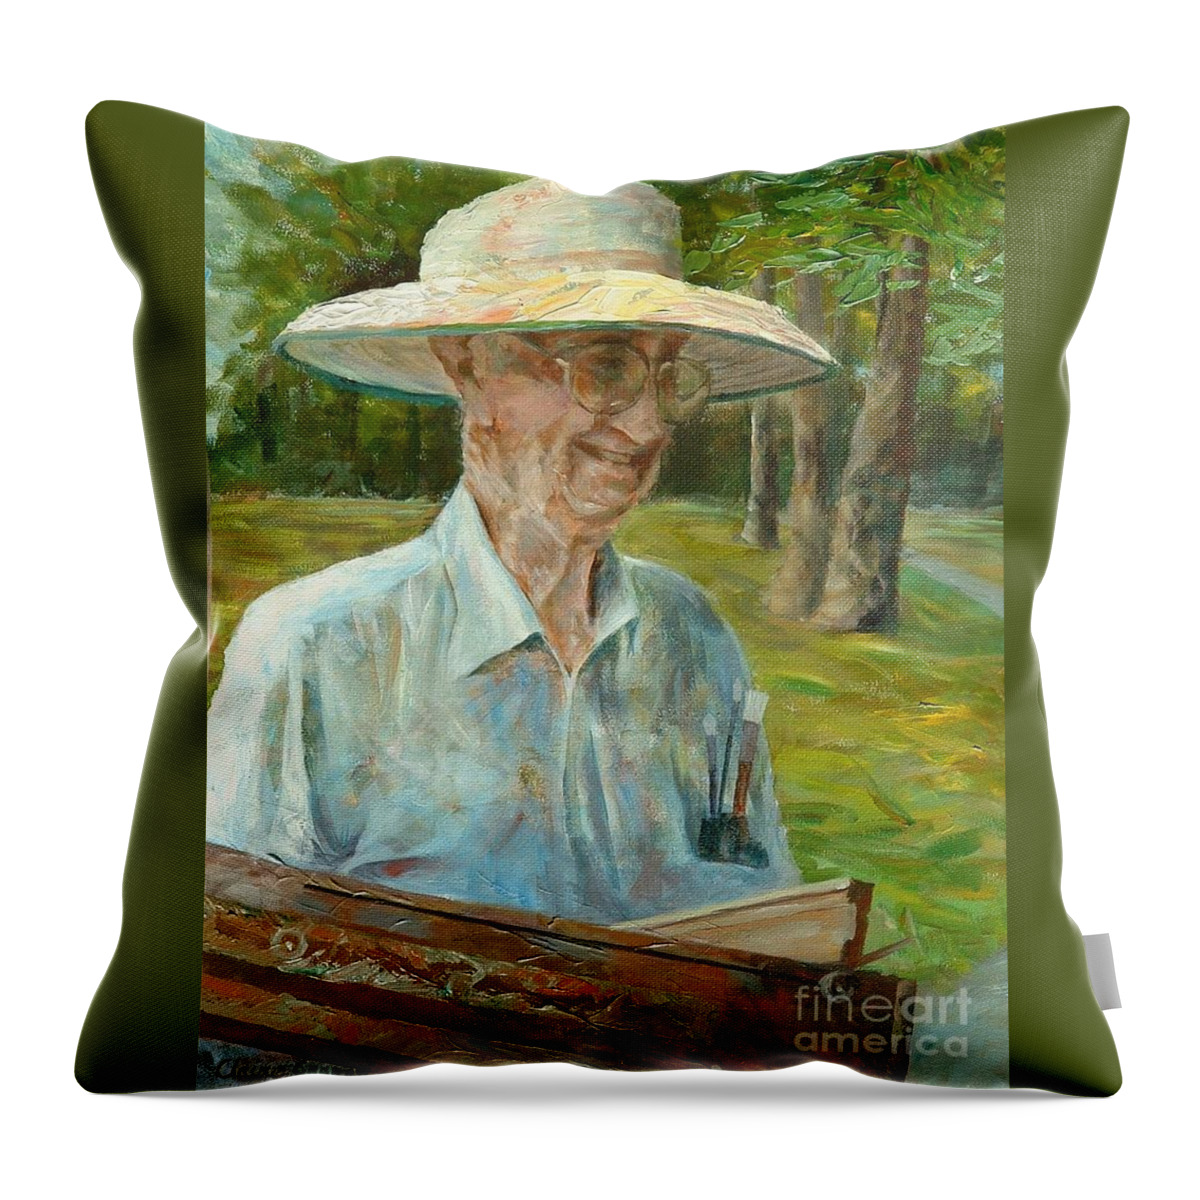 Bill Hines Throw Pillow featuring the painting Bill Hines The Legend by Claire Gagnon